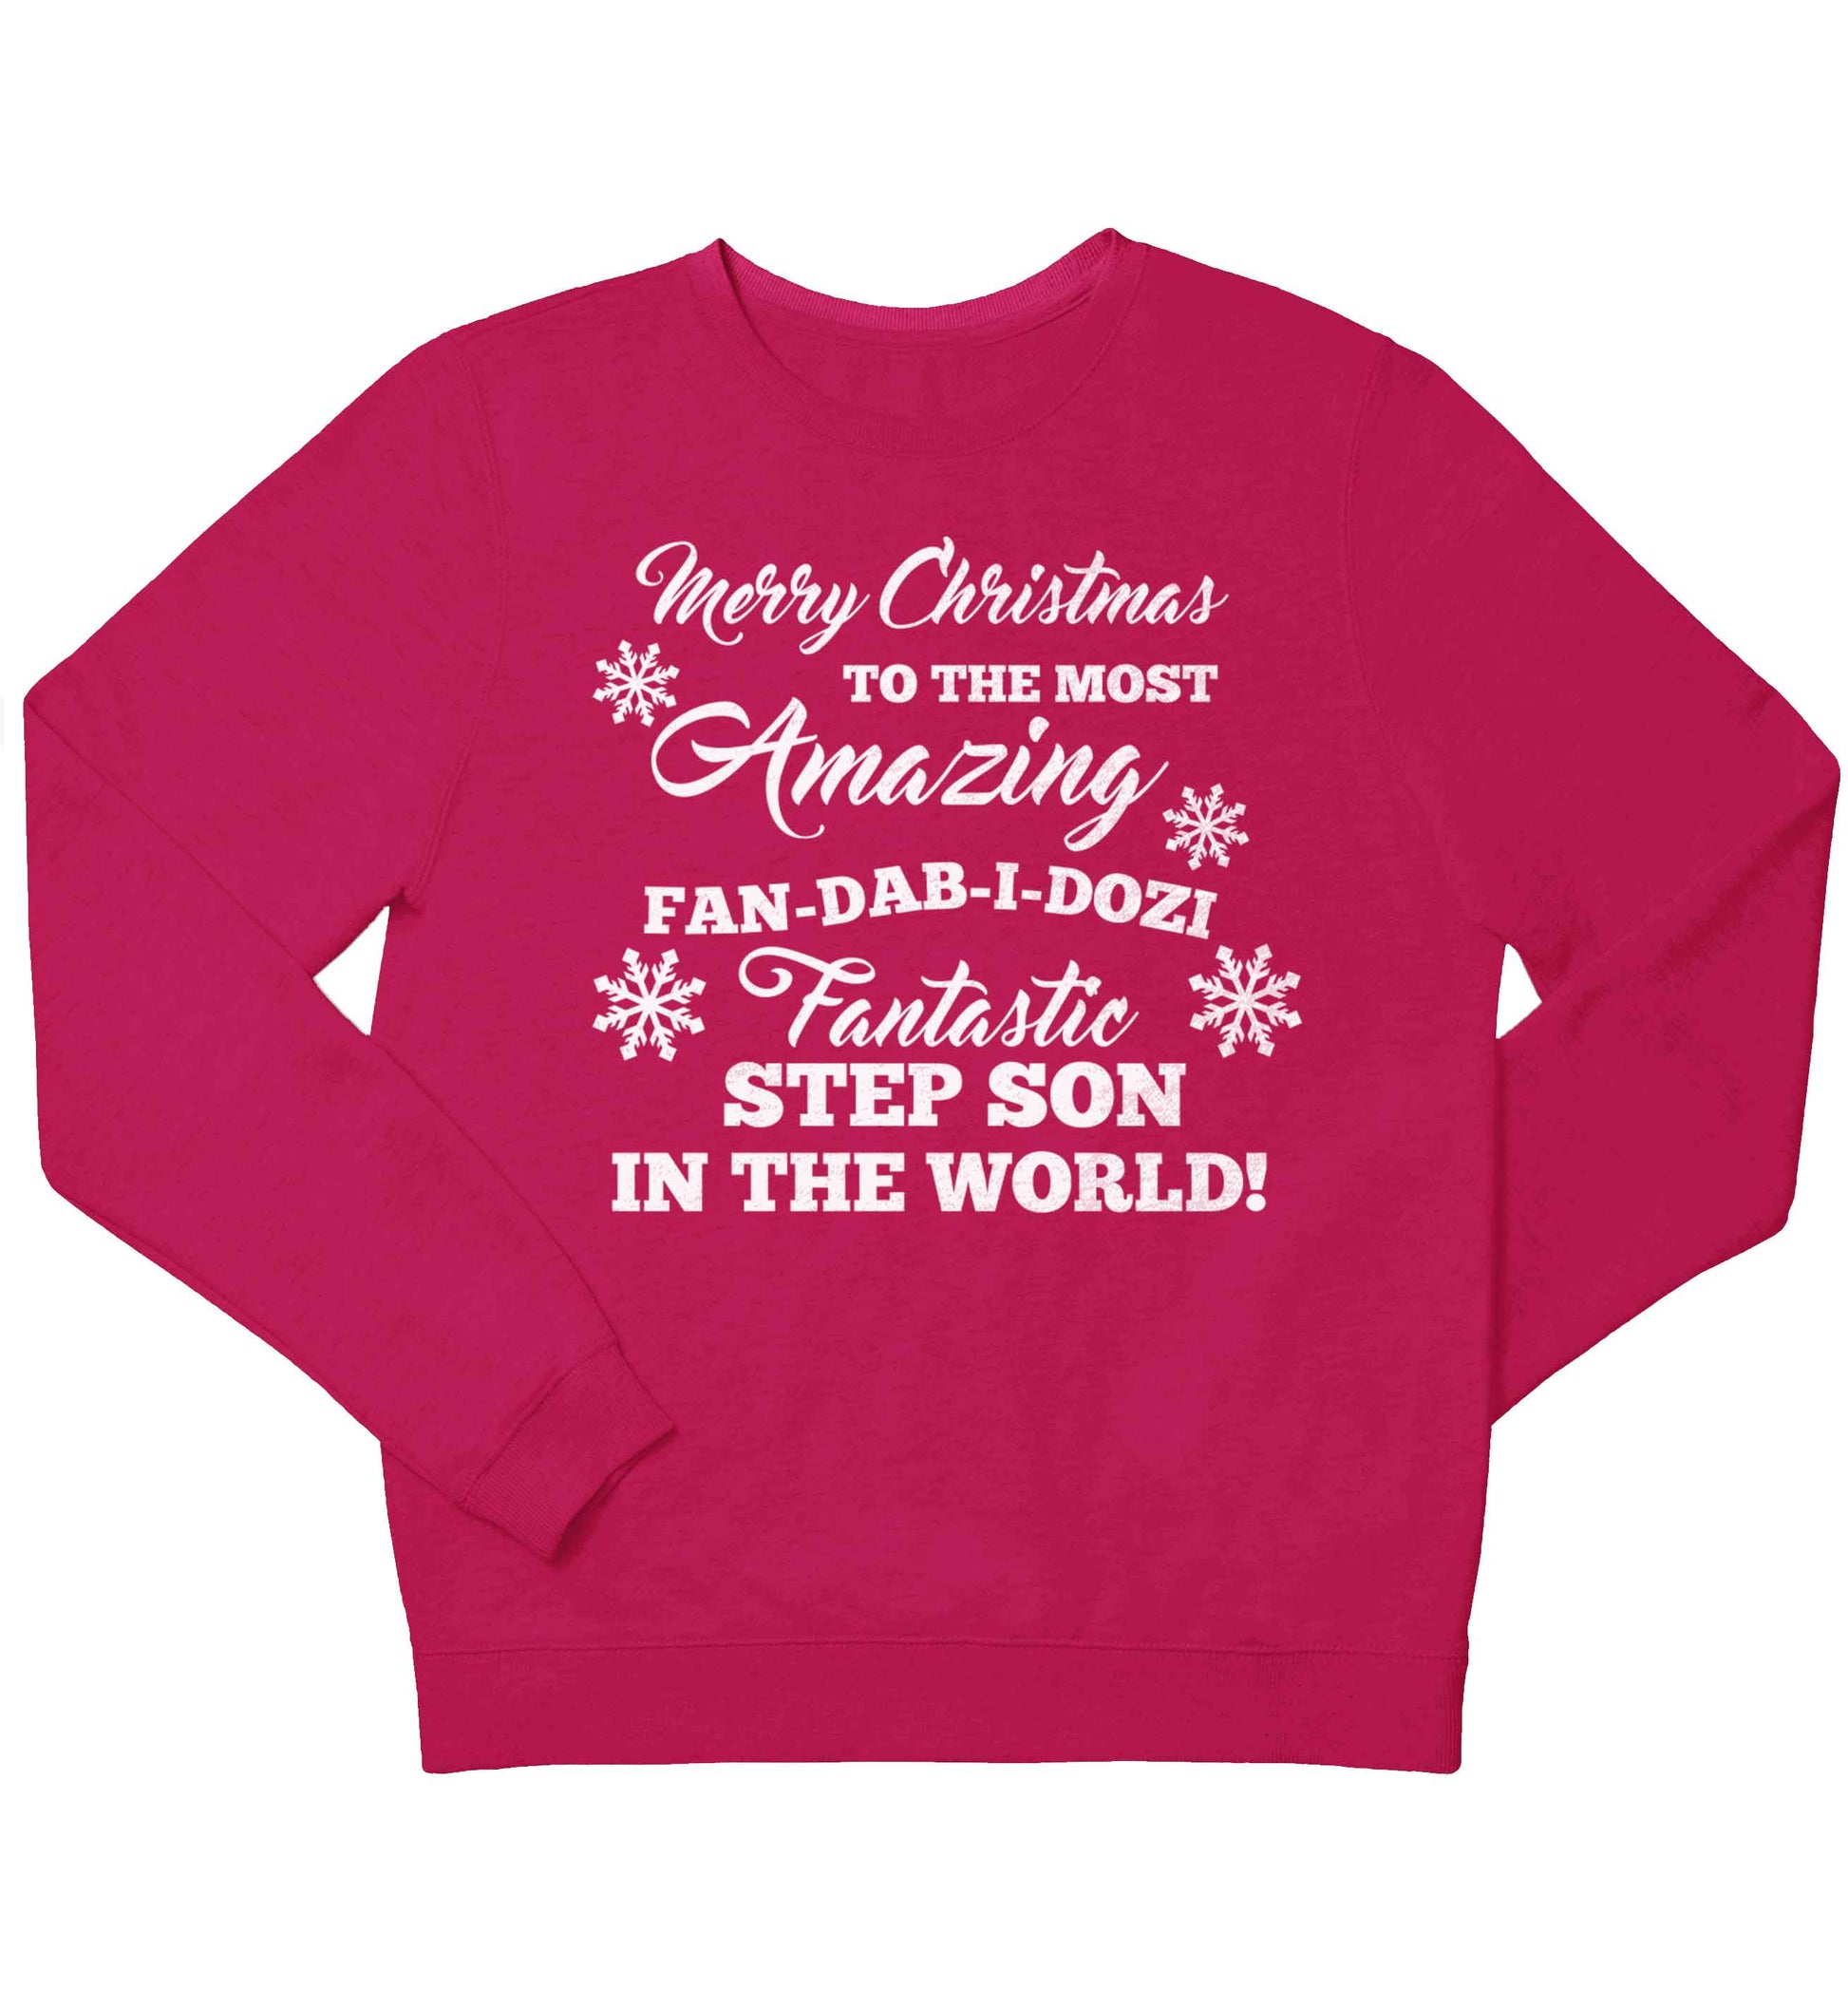 Merry Christmas to the most amazing fan-dab-i-dozi fantasic Step Son in the world children's pink sweater 12-13 Years